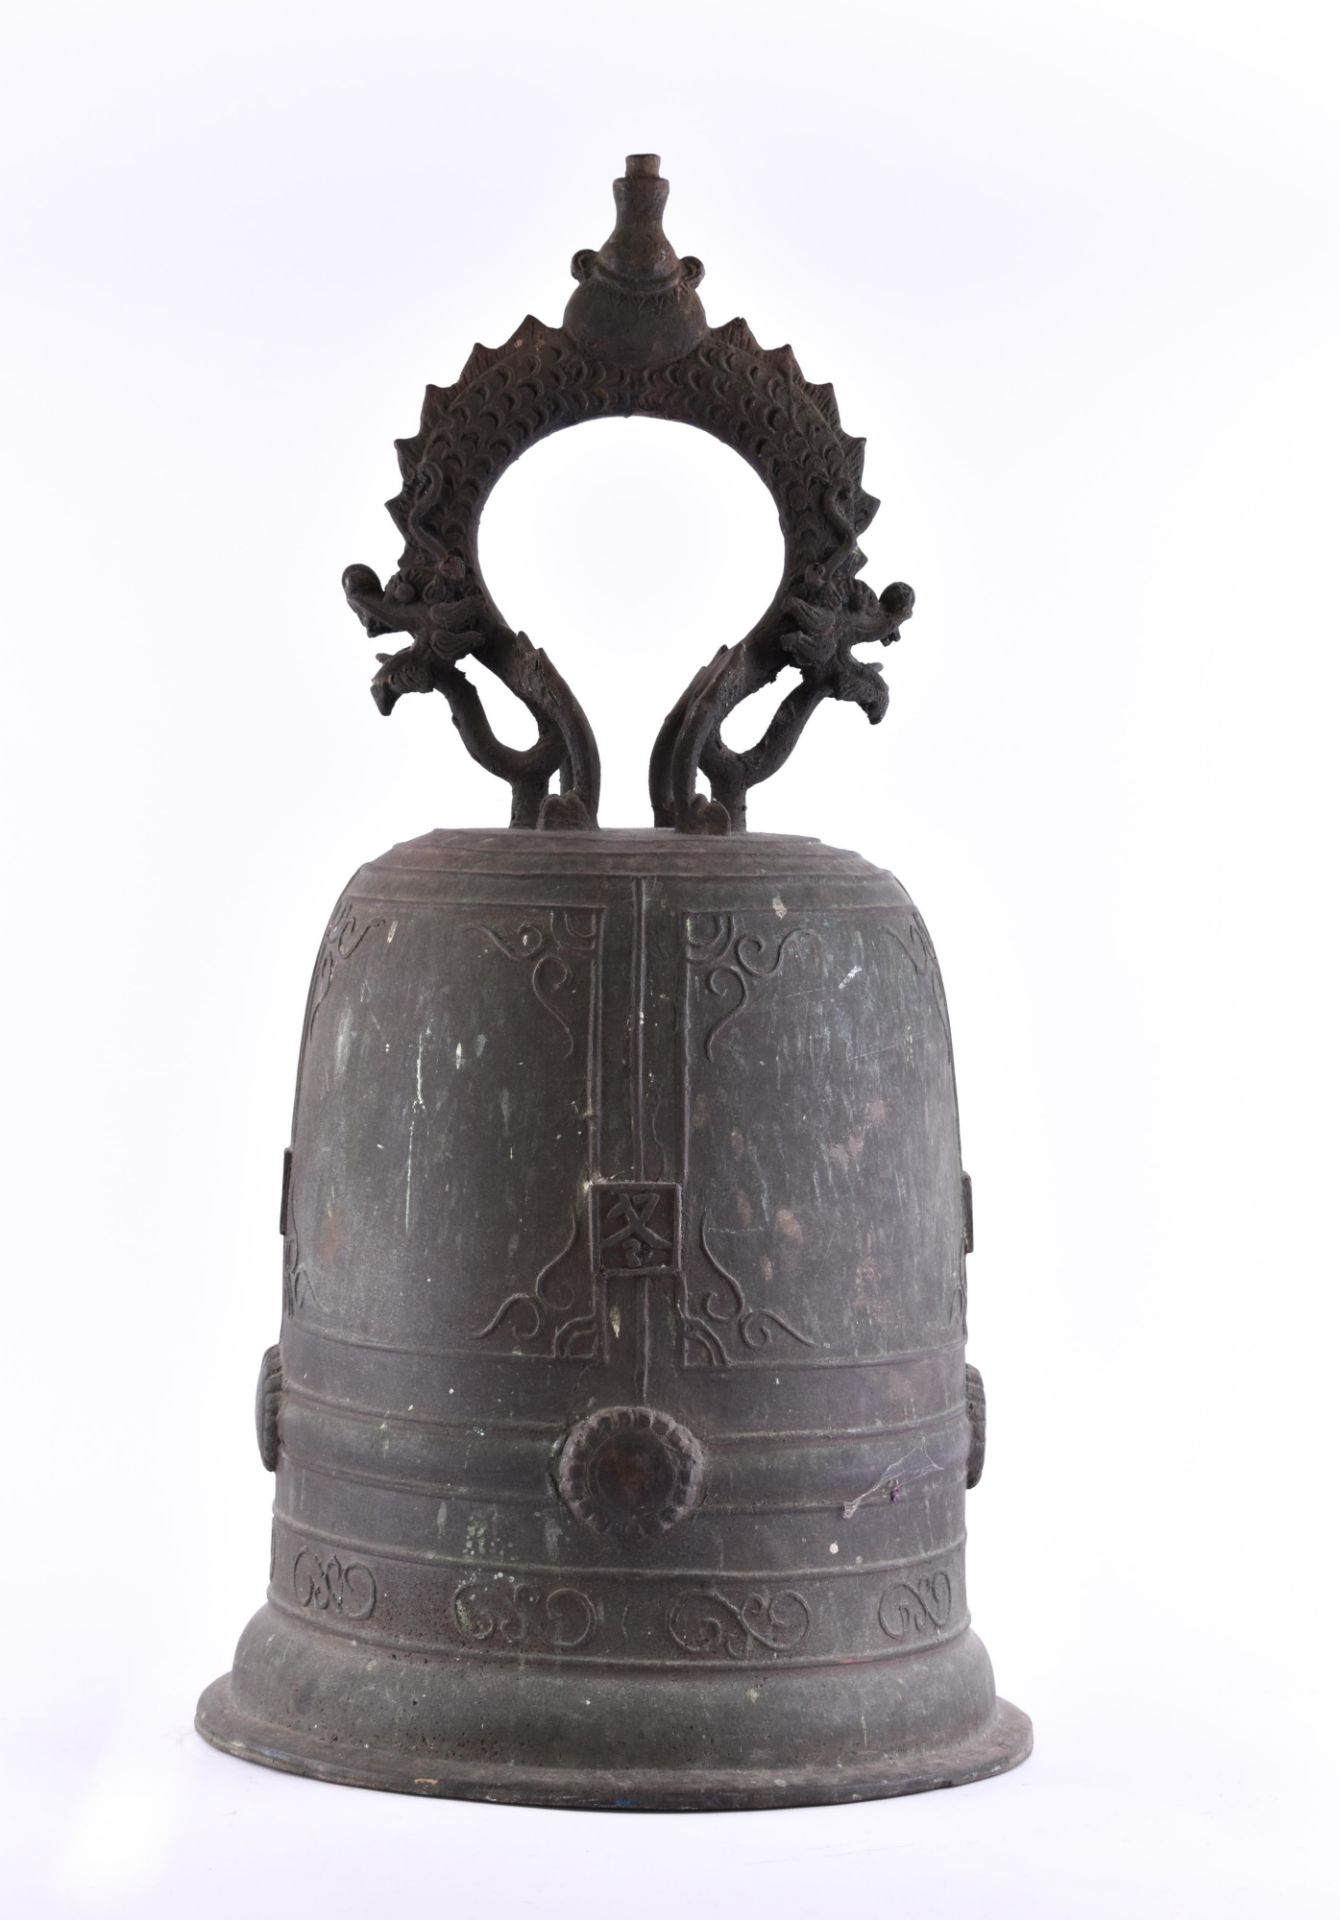 title: Temple bell South China / Vietnam Qing period 17th / 18th century